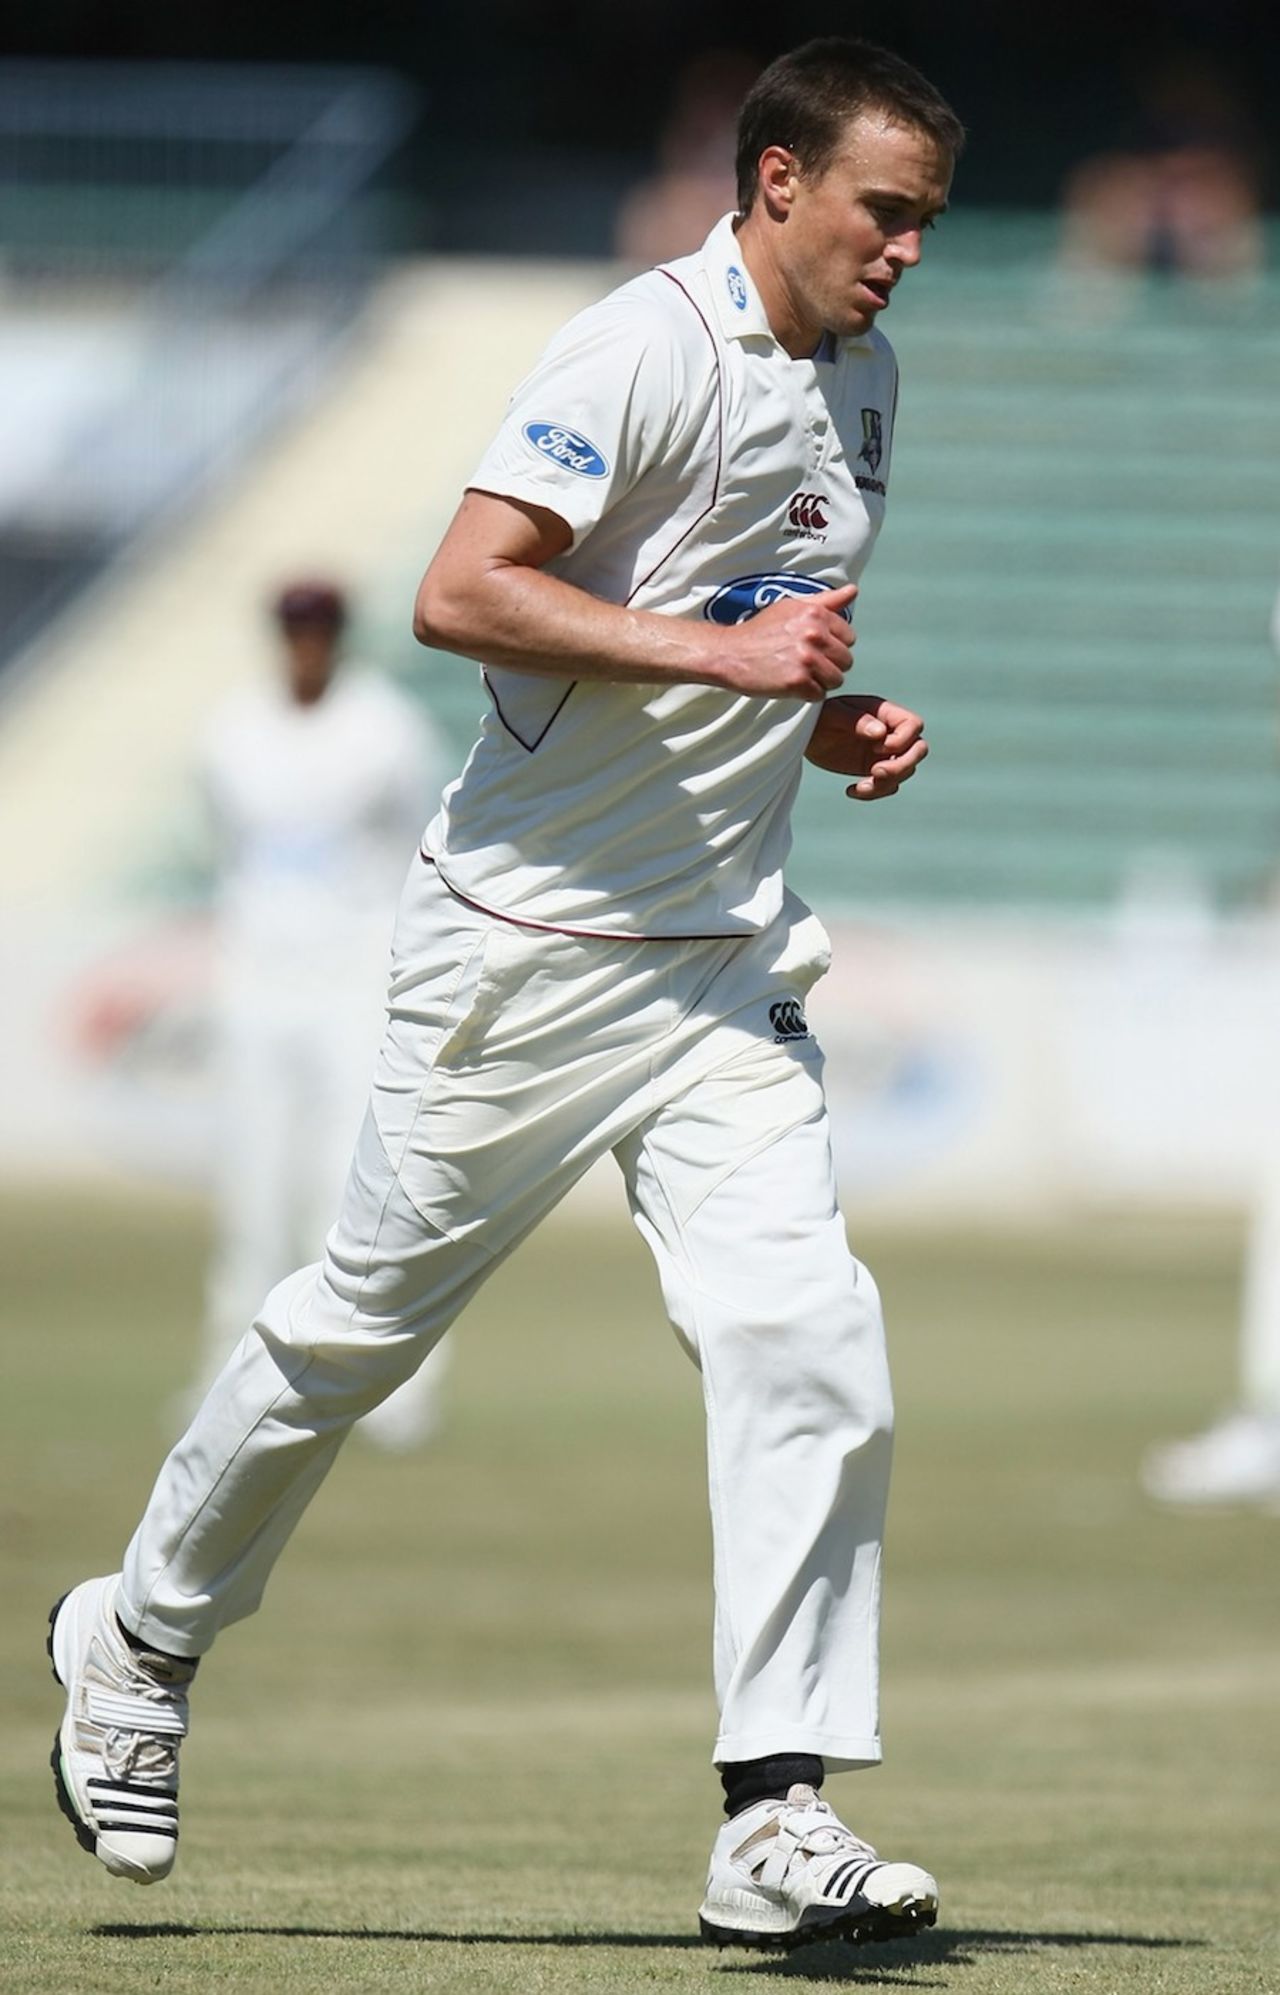 Graeme Aldridge took six wickets on the opening day of the first-class season, Otago v Northern Districts, Plunket Shield, Queenstown, 1st day, November 9, 2010